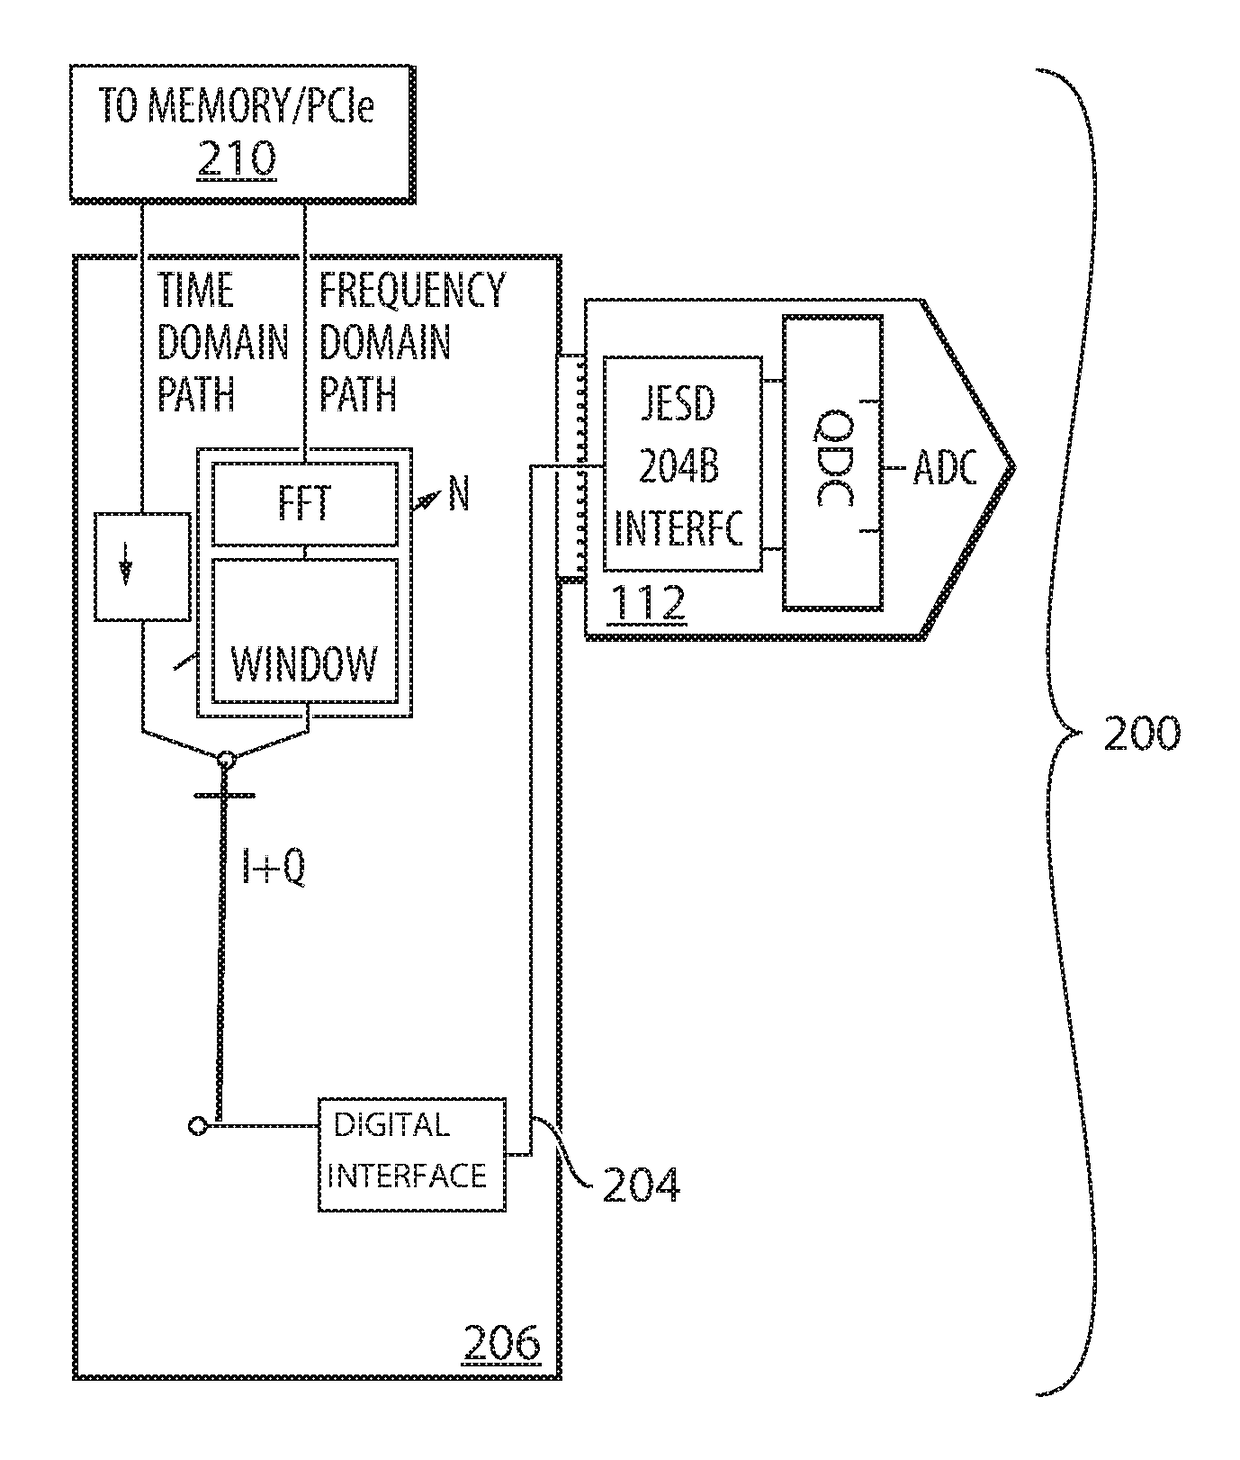 Frequency and time domain streaming receiver